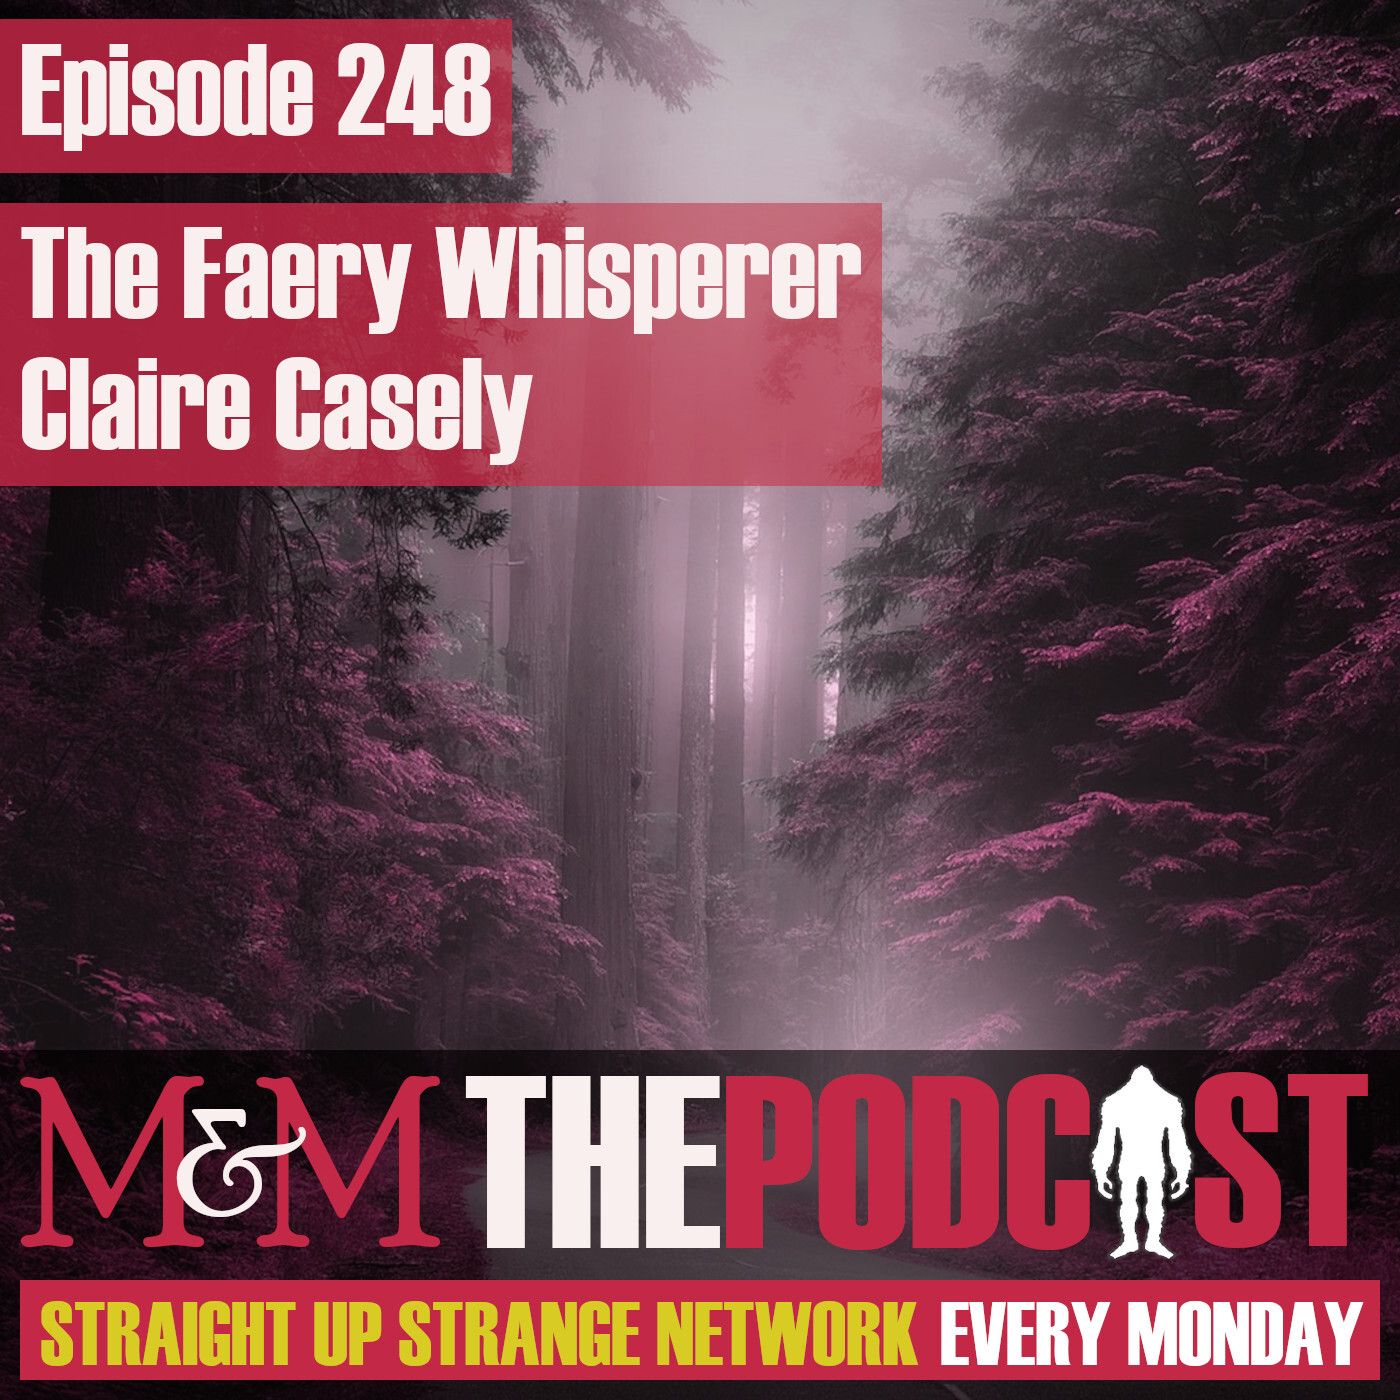 Mysteries and Monsters: Episode 248 The Faery Whisperer Claire Casely